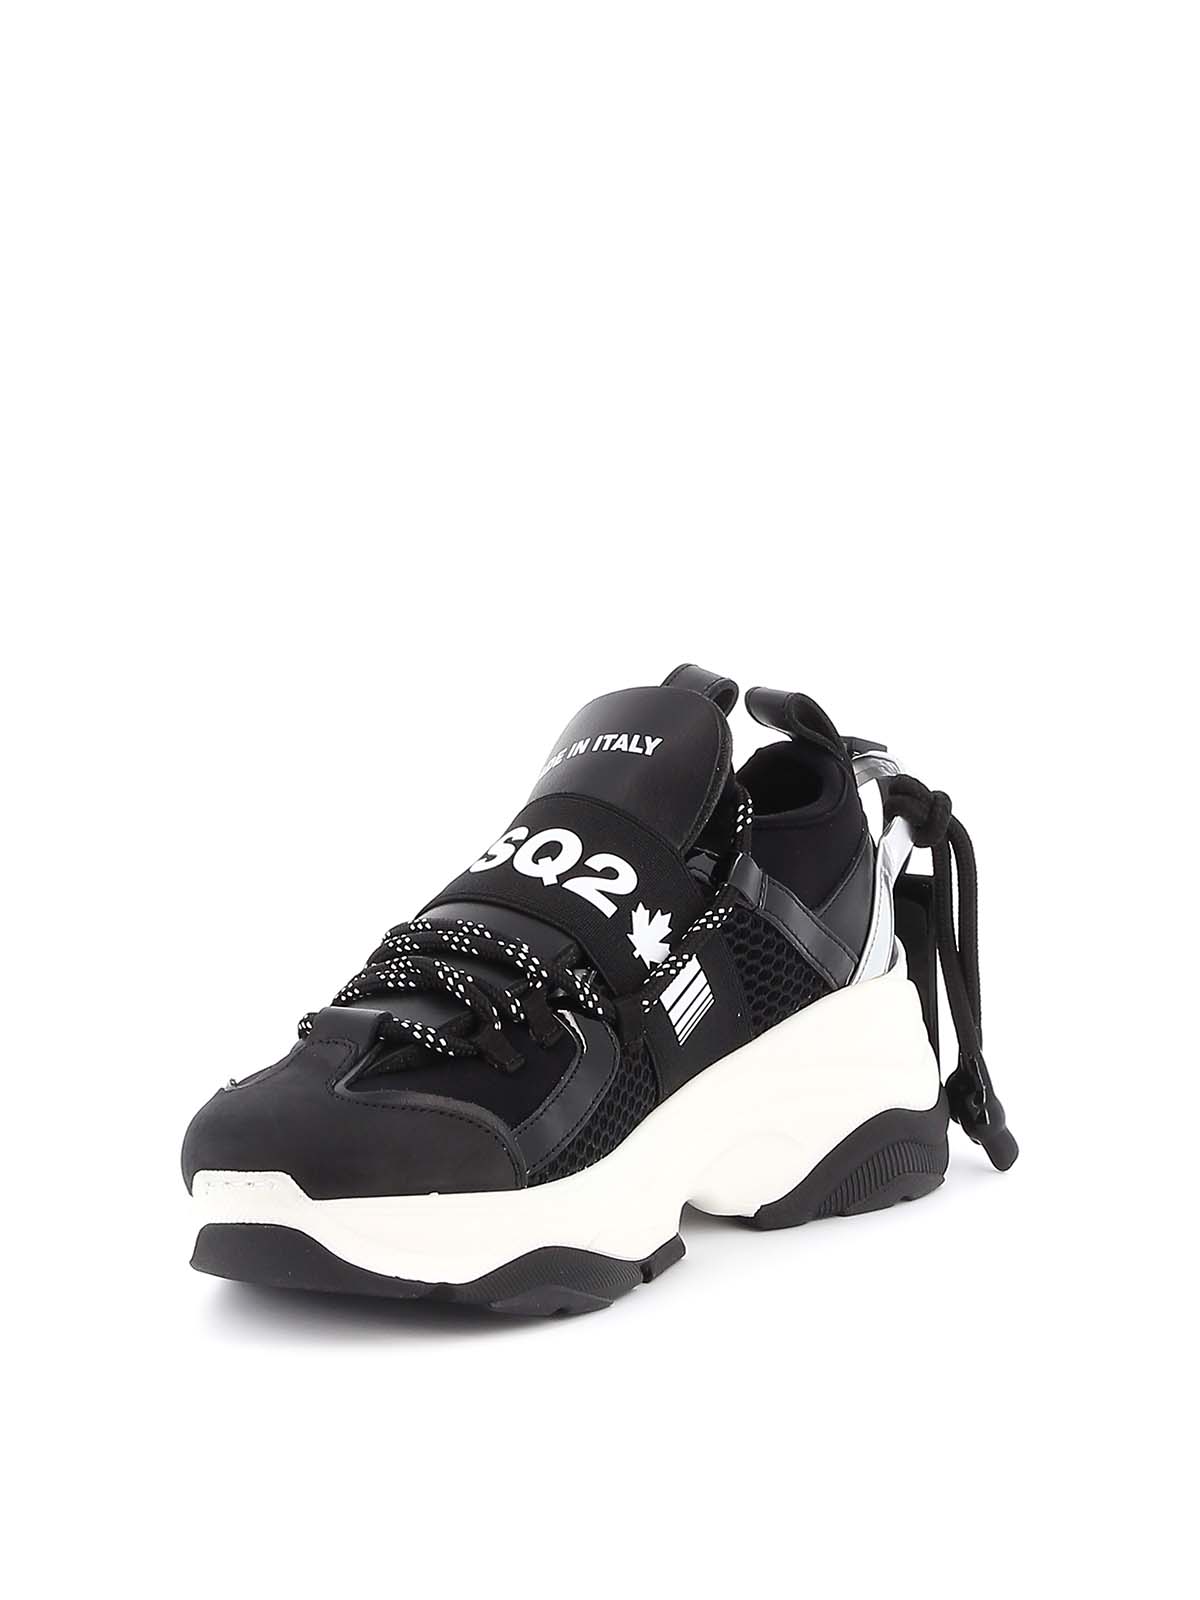 Dsquared2 - D-Bumpy One black sneakers 